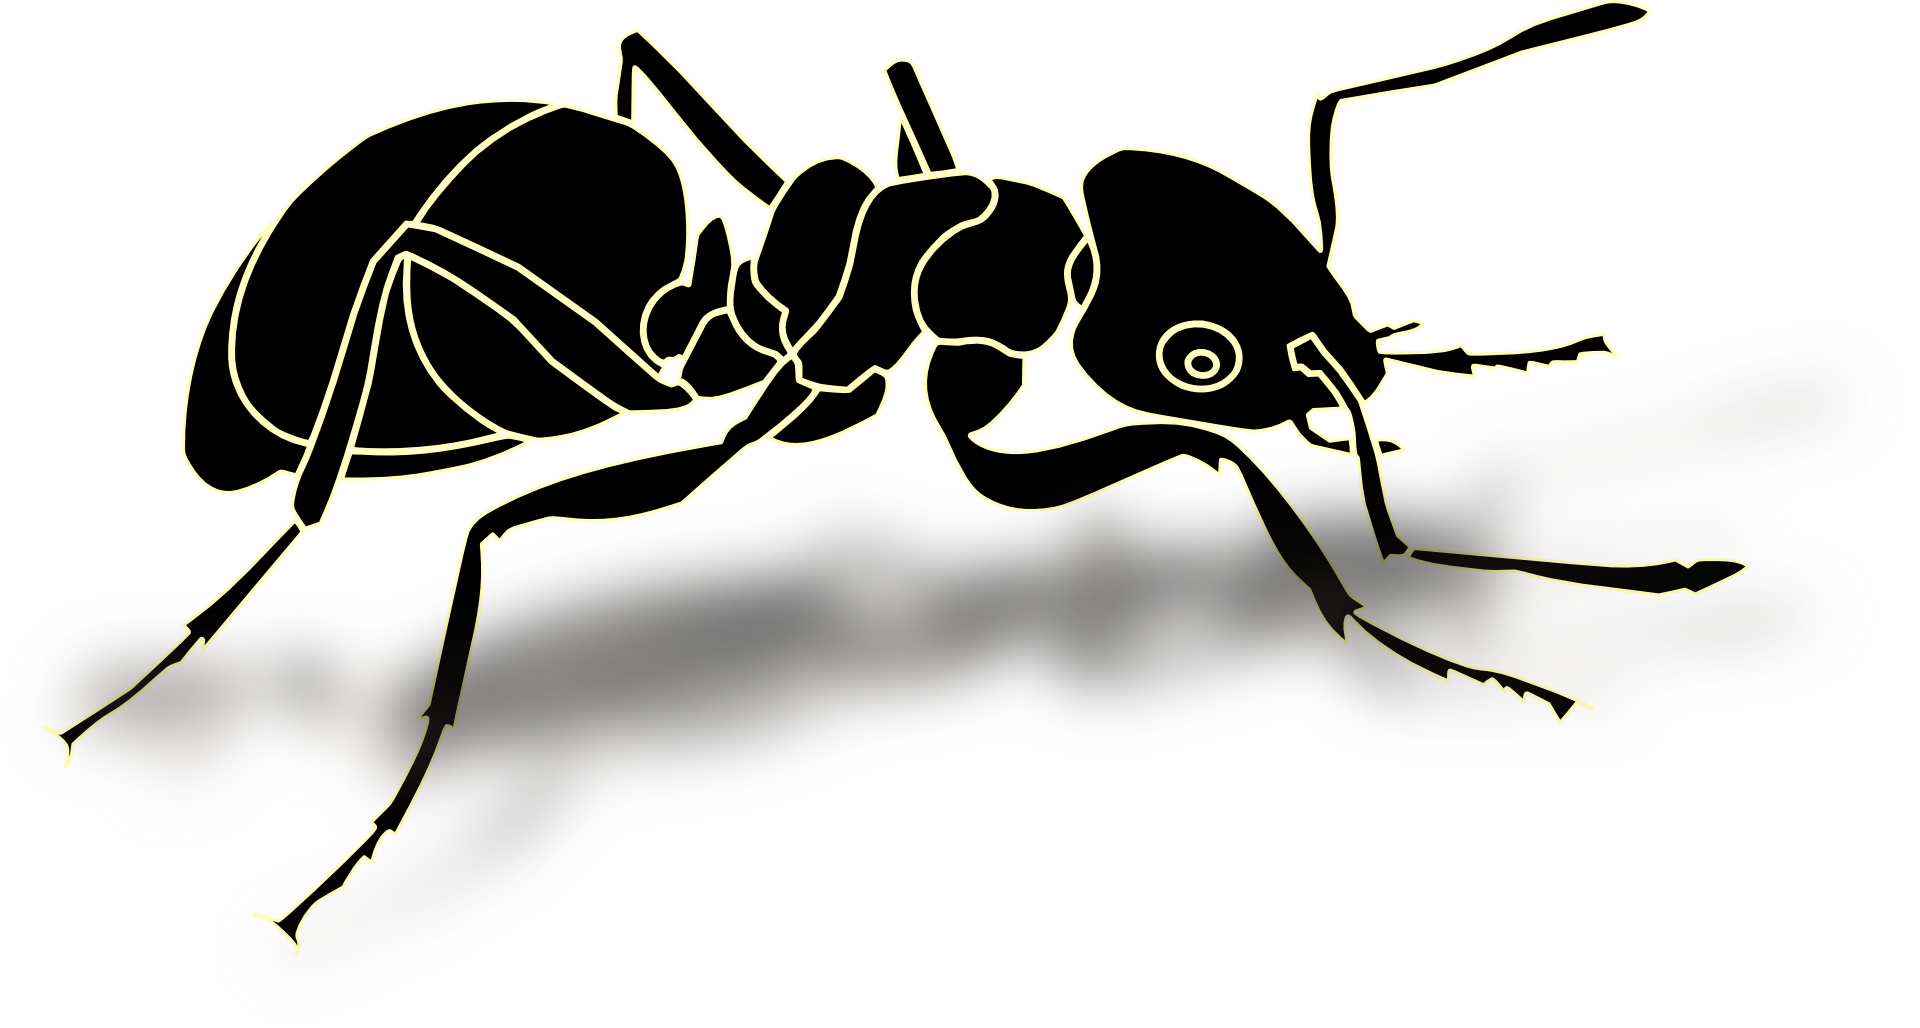     Black Ant Outlineinsect Vectorfree Psd   Clipart Best   Clipart Best